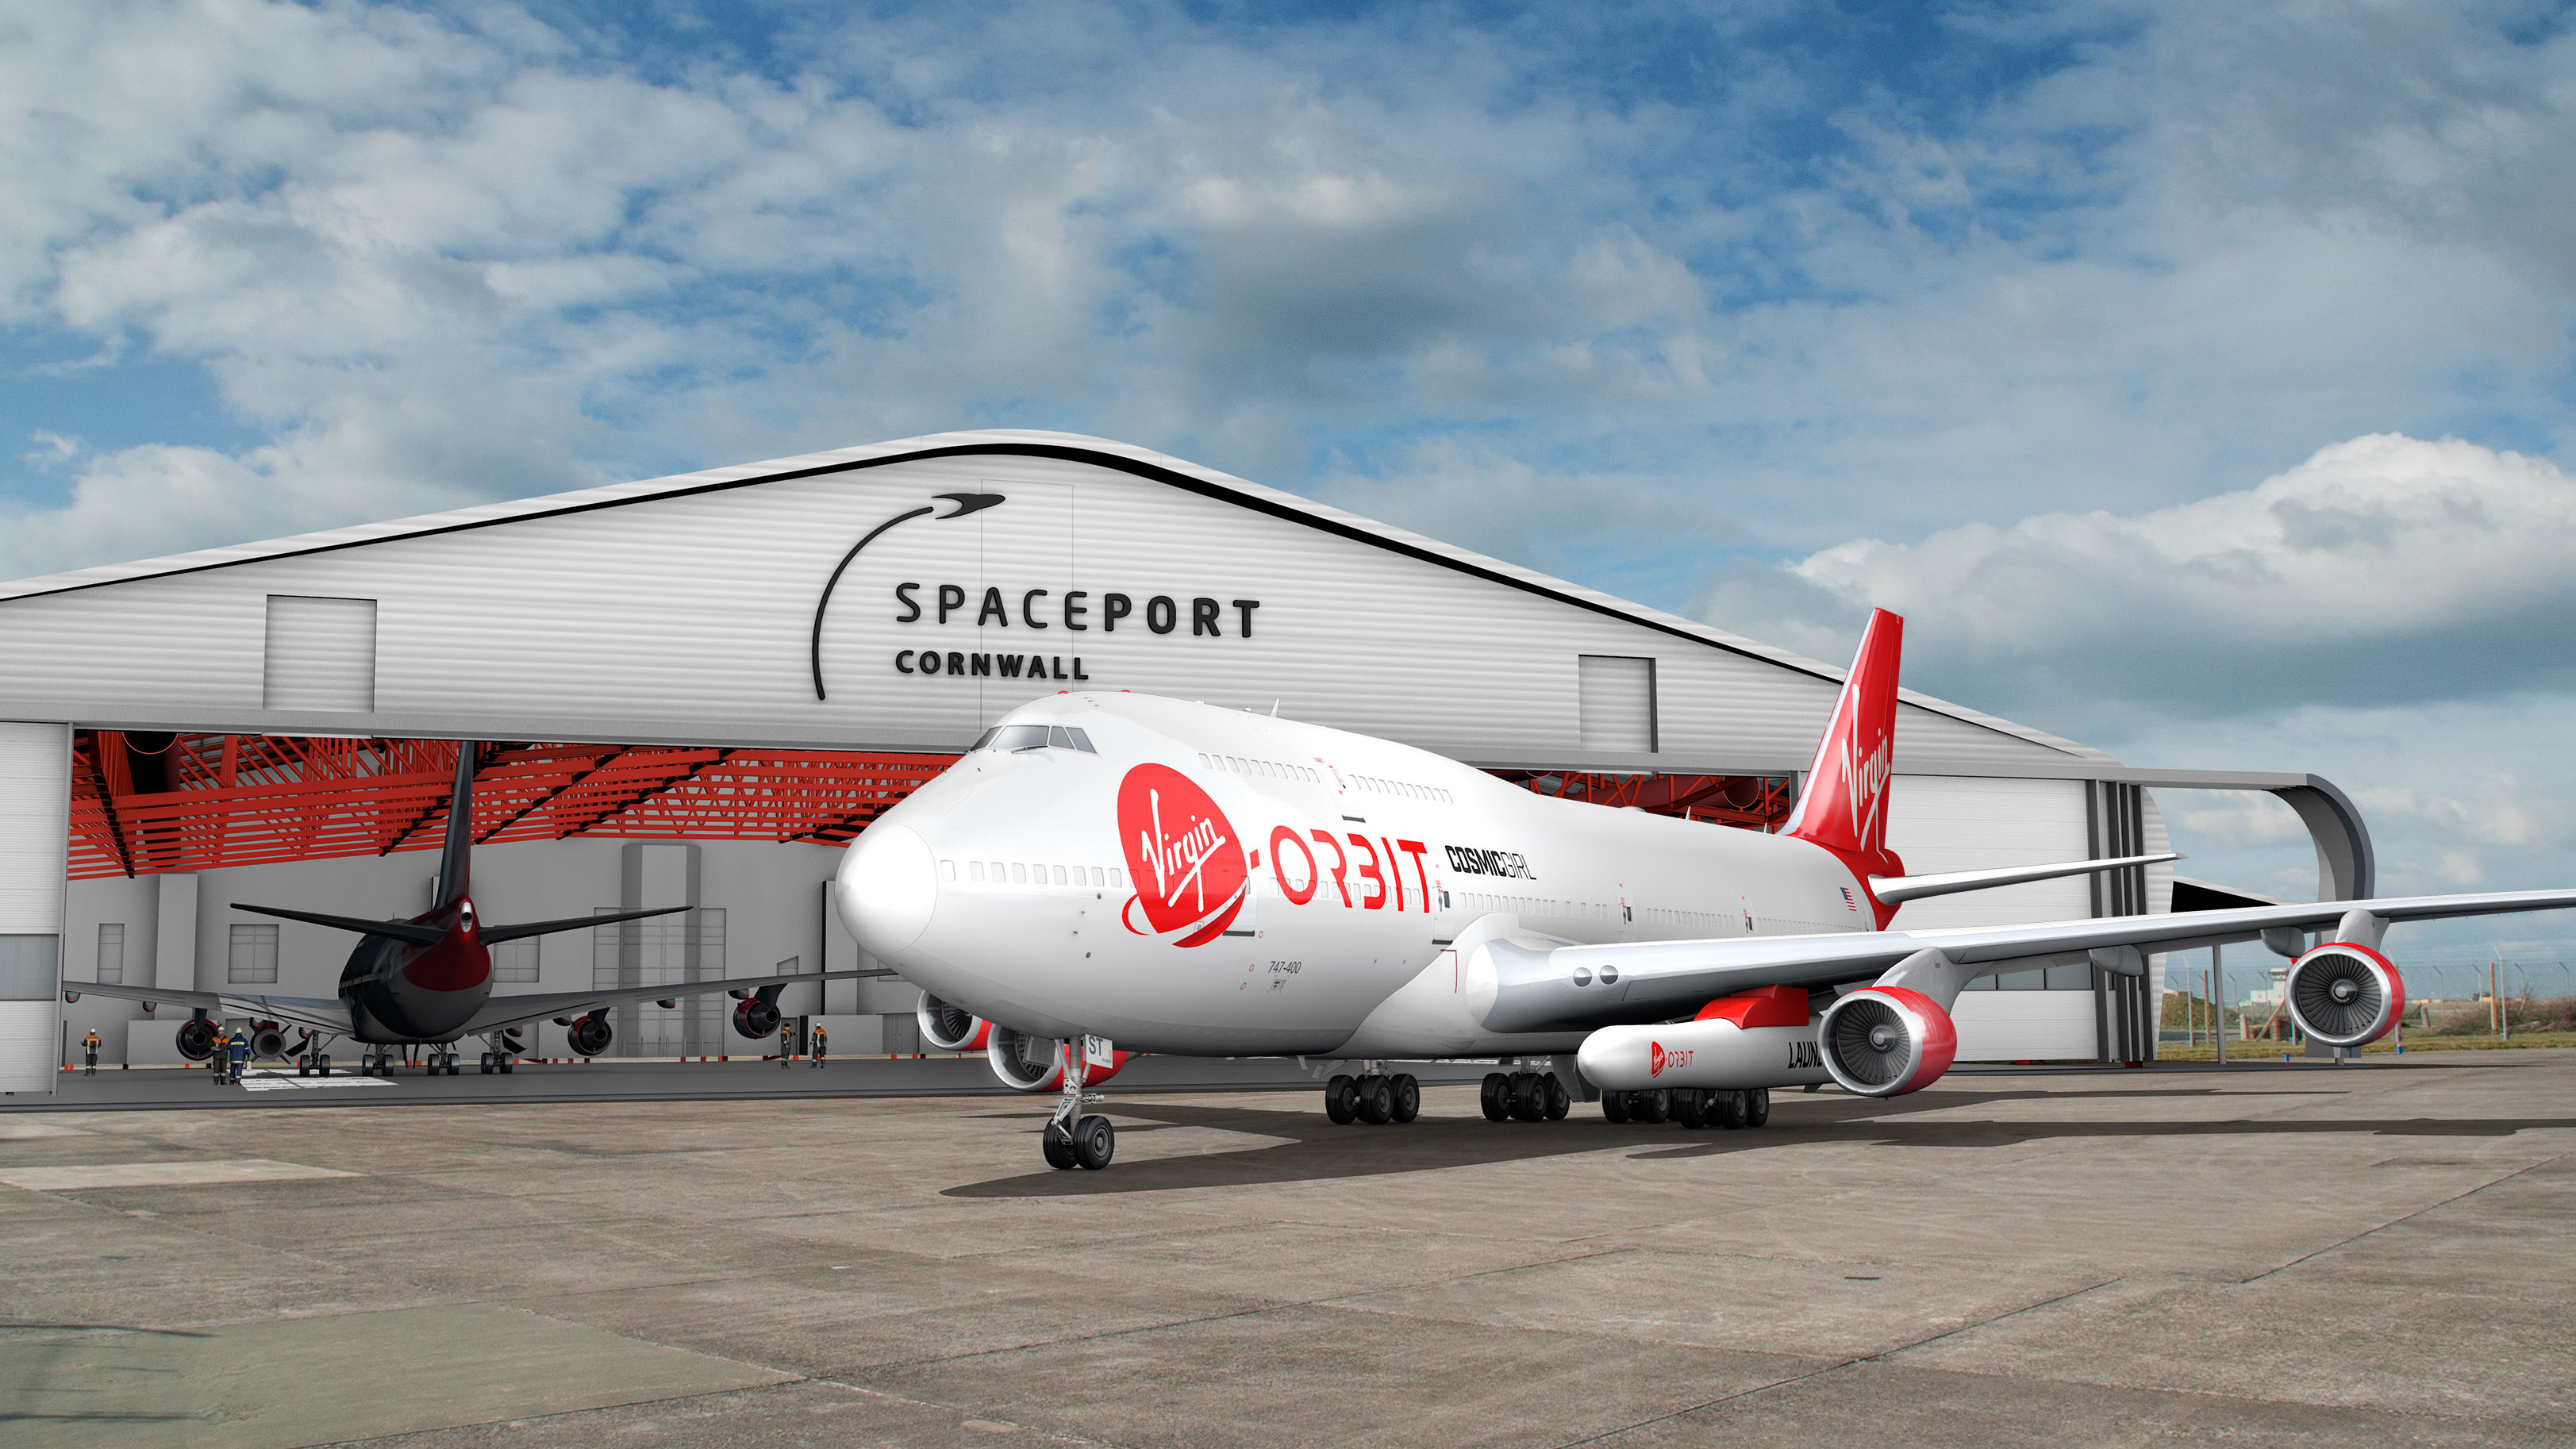 Virgin Orbit ready for historic UK launch after spaceport secures license